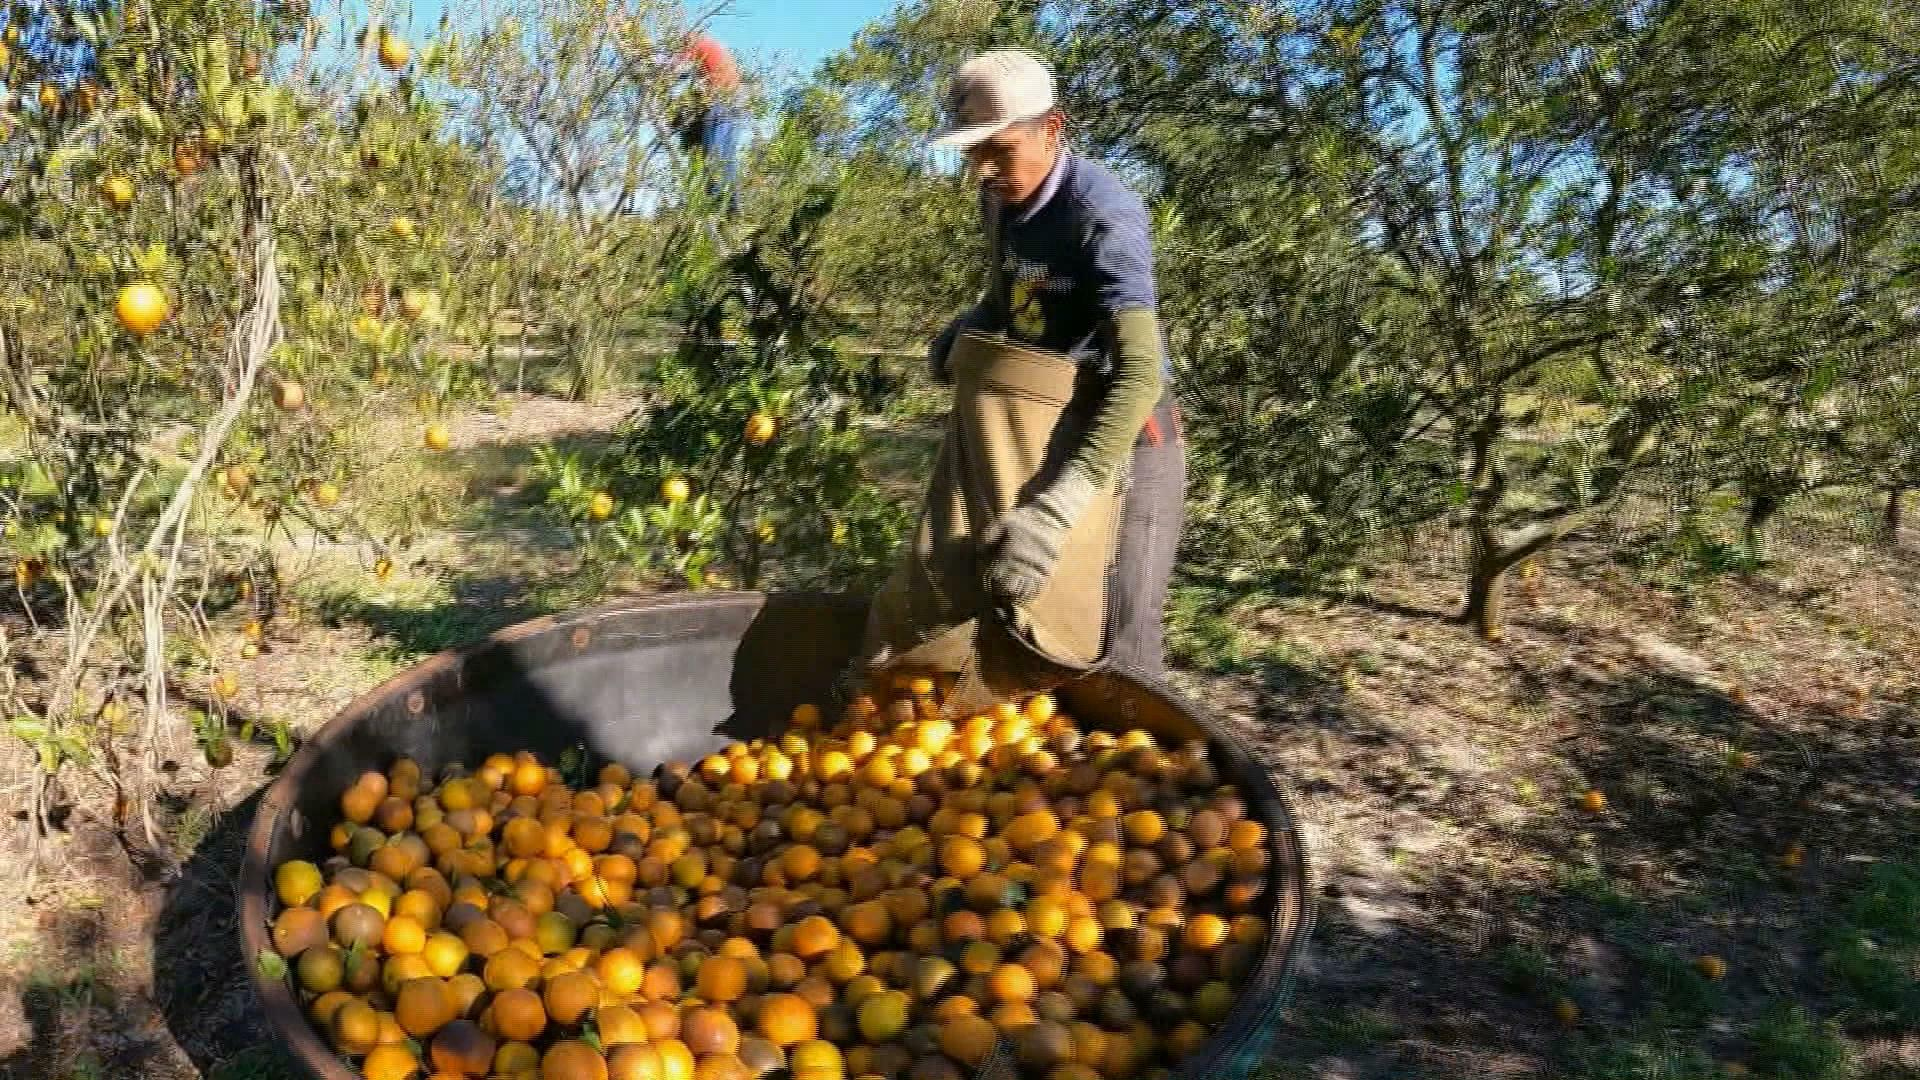 Watch CBS Mornings Florida orange crops in crisis Full show on CBS